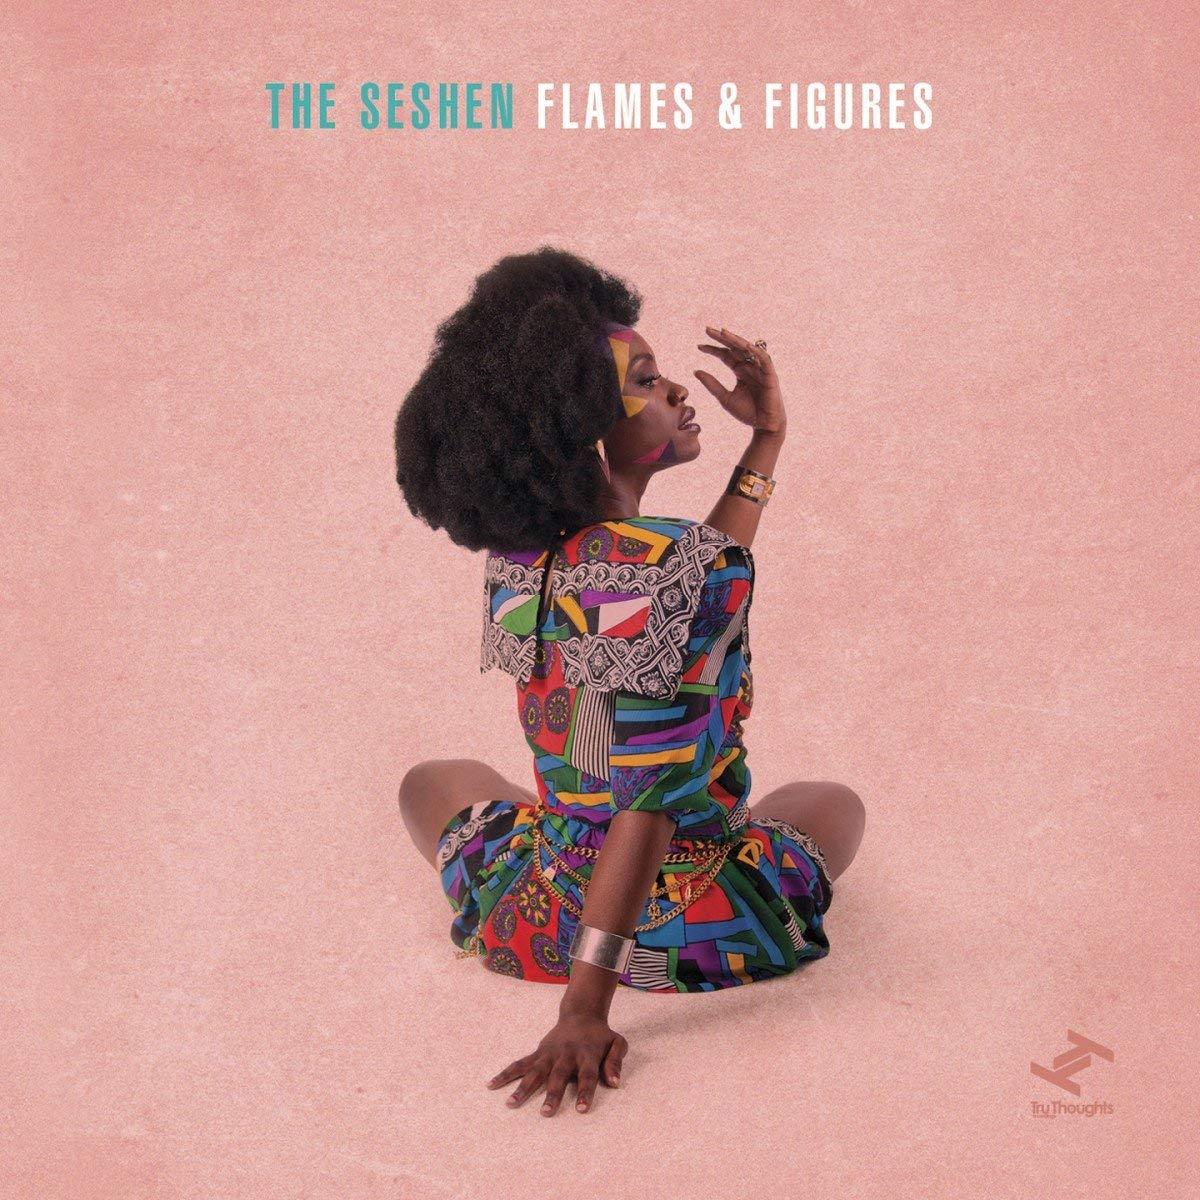 Flames & Figures / The Seshen